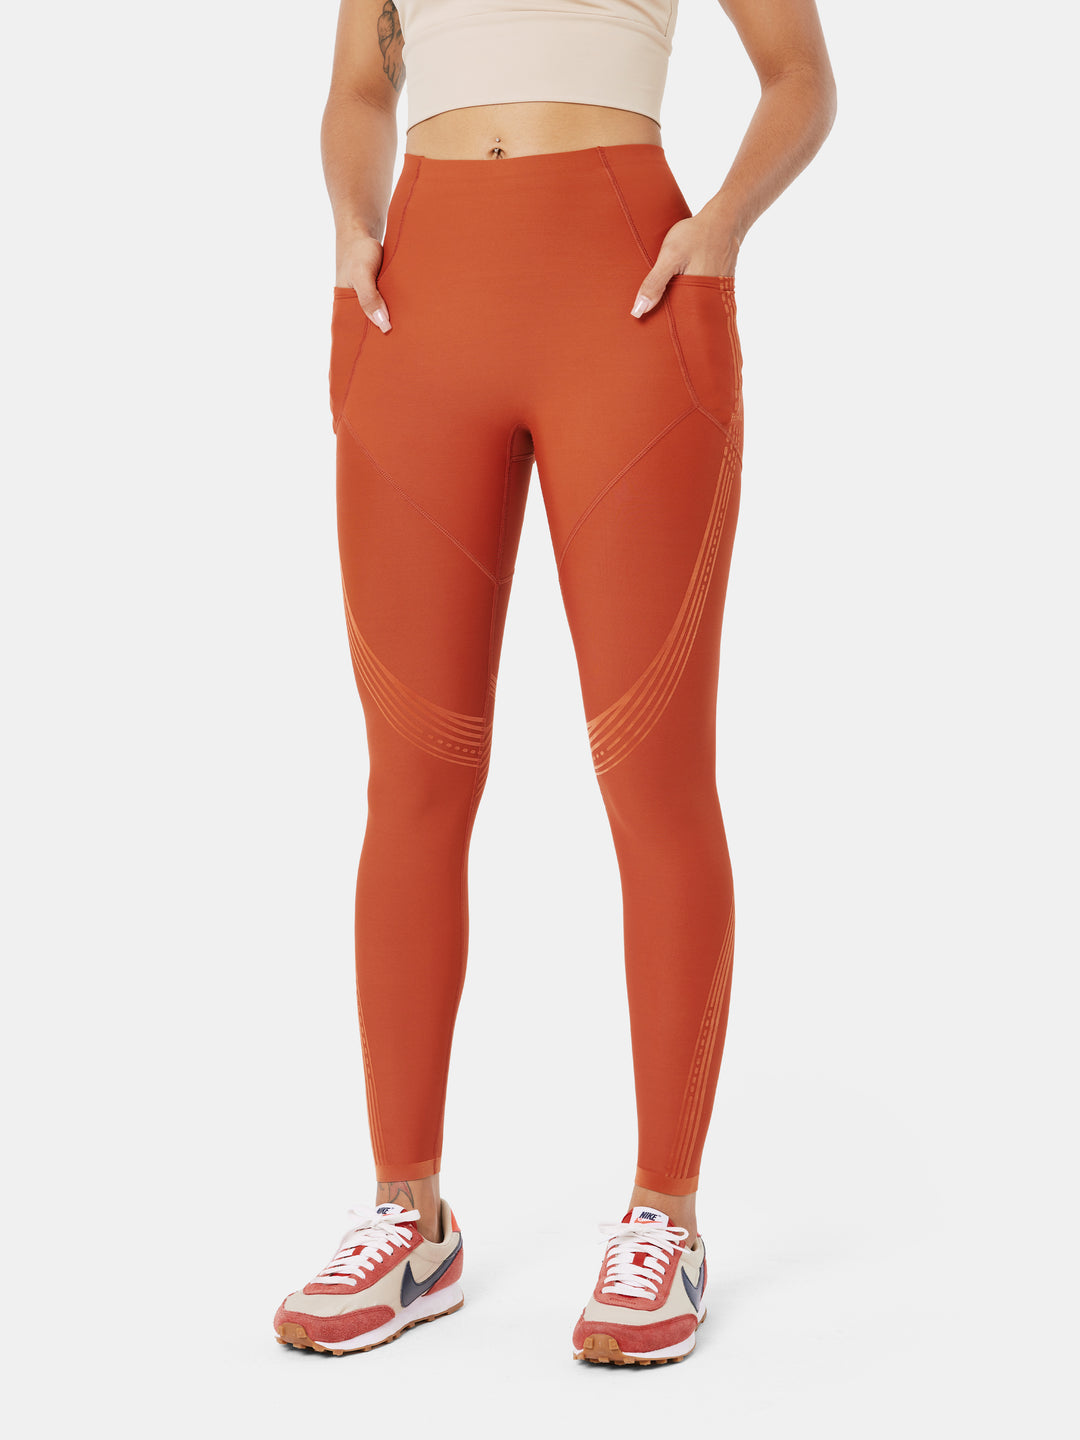 These 2-IN-1 Body Sculpt Leggings from @Fanka are AMAZING! 10/10